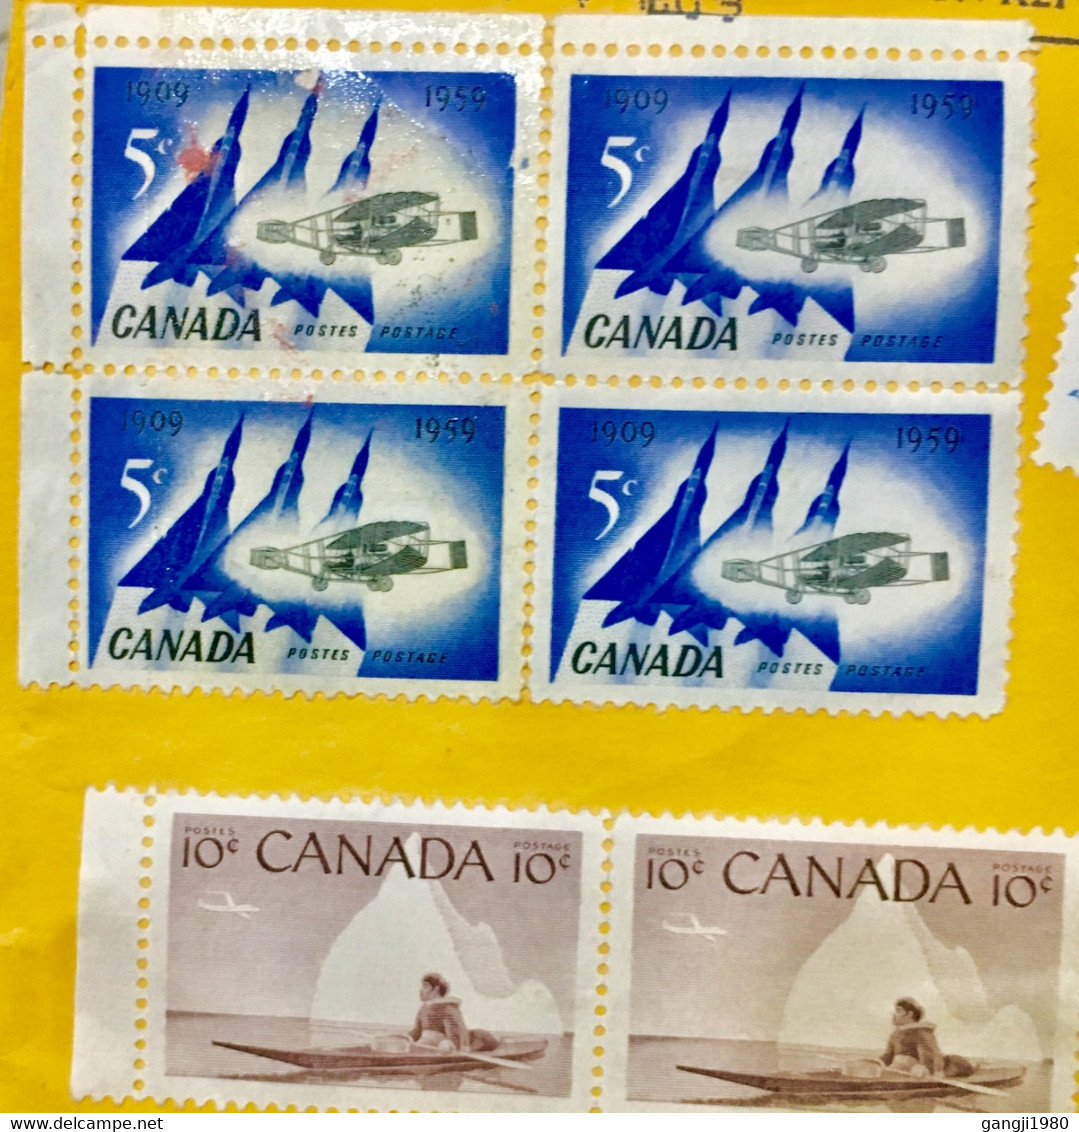 CANADA 2008, COVER 31 STAMPS ALL WITHOUT CANCELLATION ,BOOKLET PANE ,BLOCK ,FLOWER SHIP ,AEROPLANE ,CHIRSTMAS ,BOAT RACE - Covers & Documents